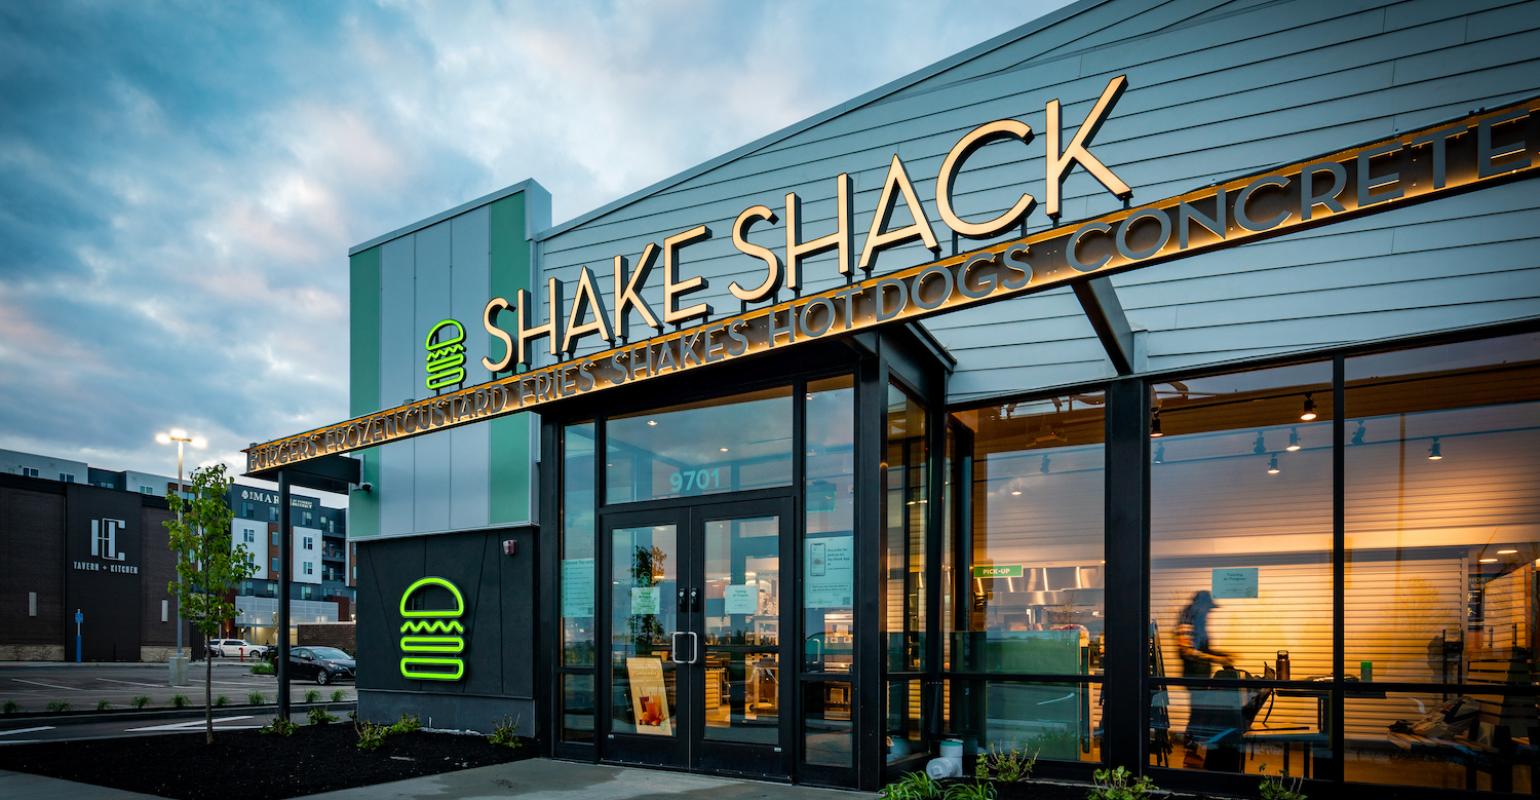 Shake Shack takes on Chick-fil-A in chicken sandwich giveaway on Sundays in April